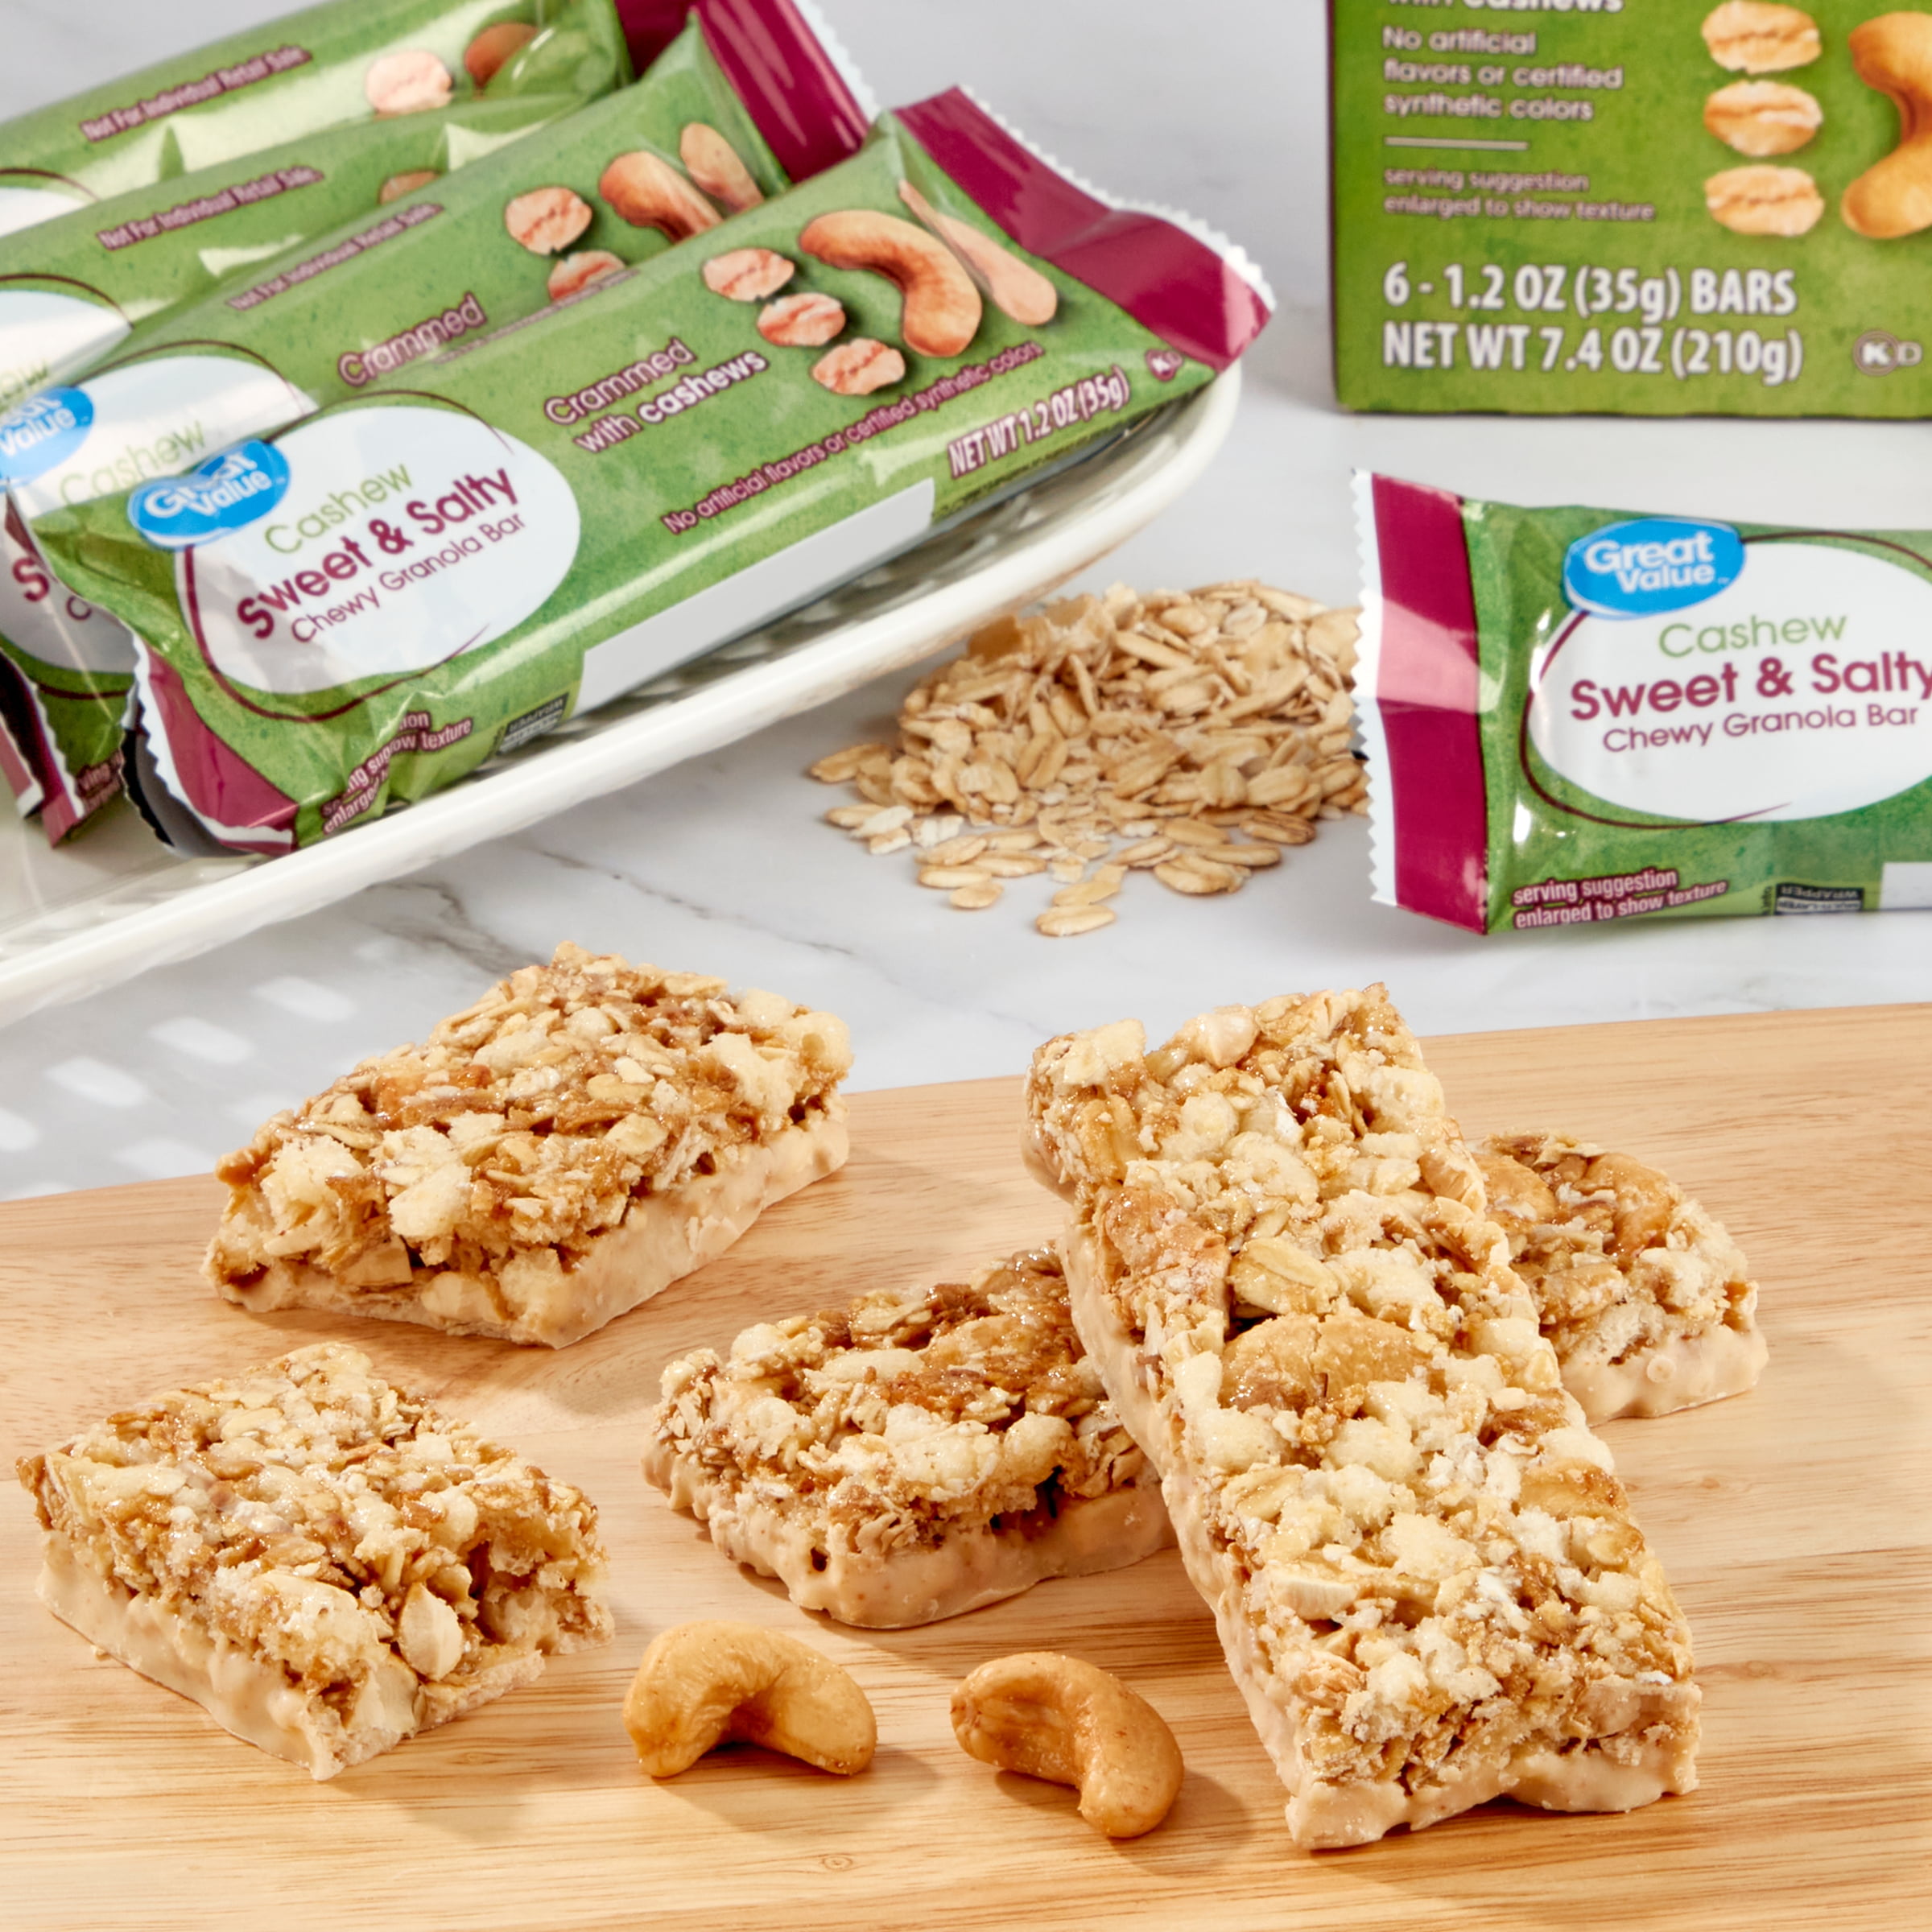 Nature Valley Almond Sweet & Salty Nut Granola Bars - Shop Granola & Snack  Bars at H-E-B